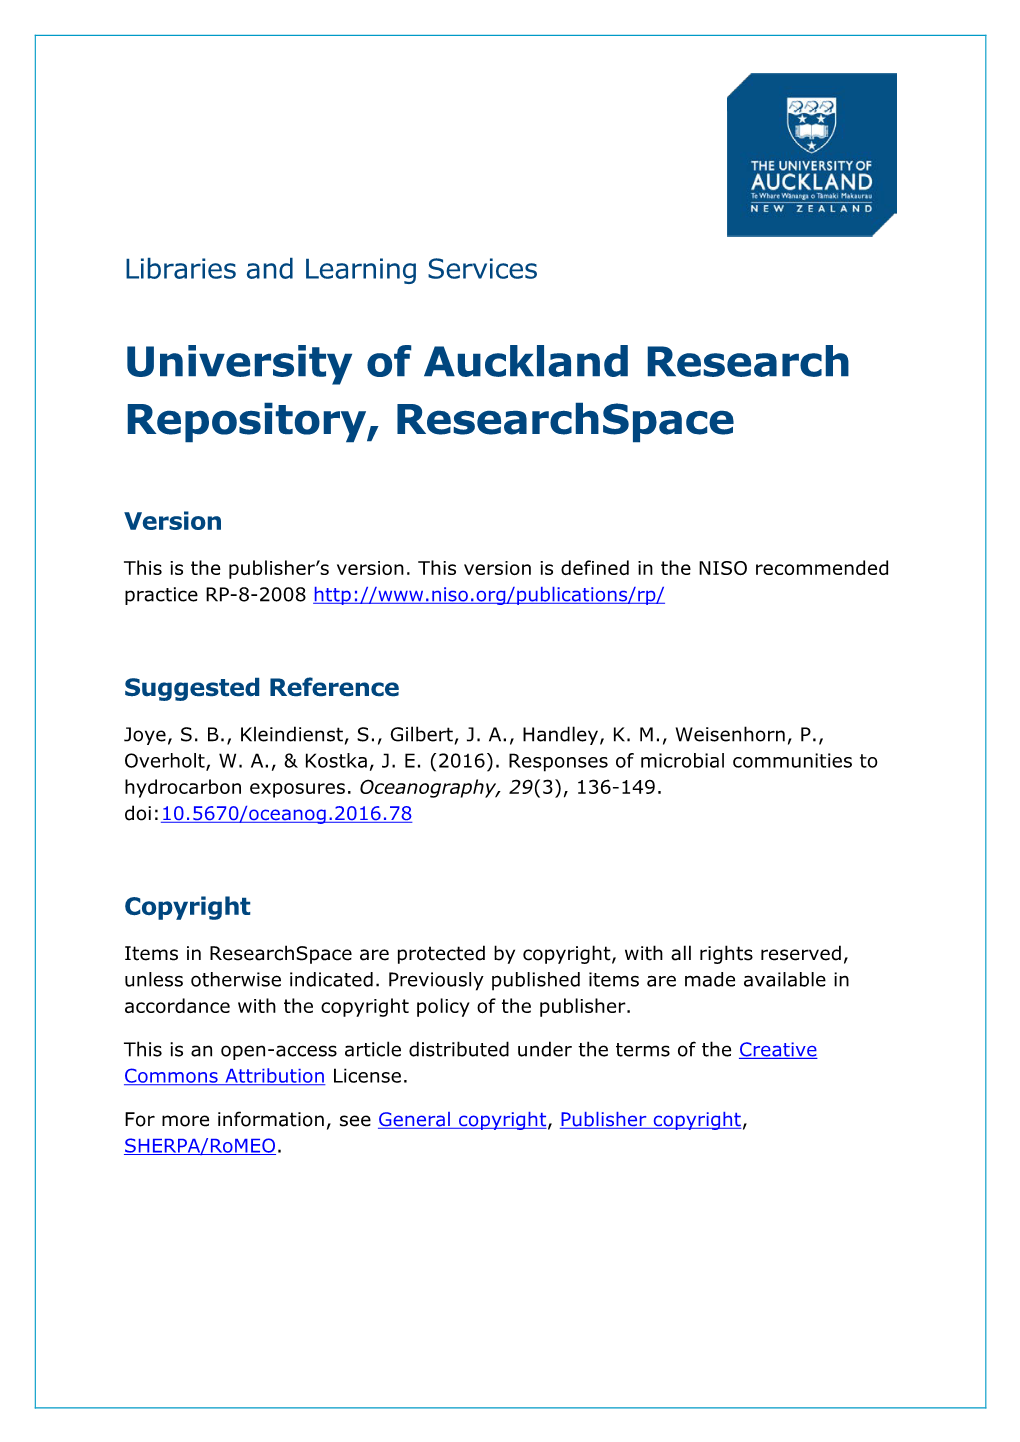 University of Auckland Research Repository, Researchspace